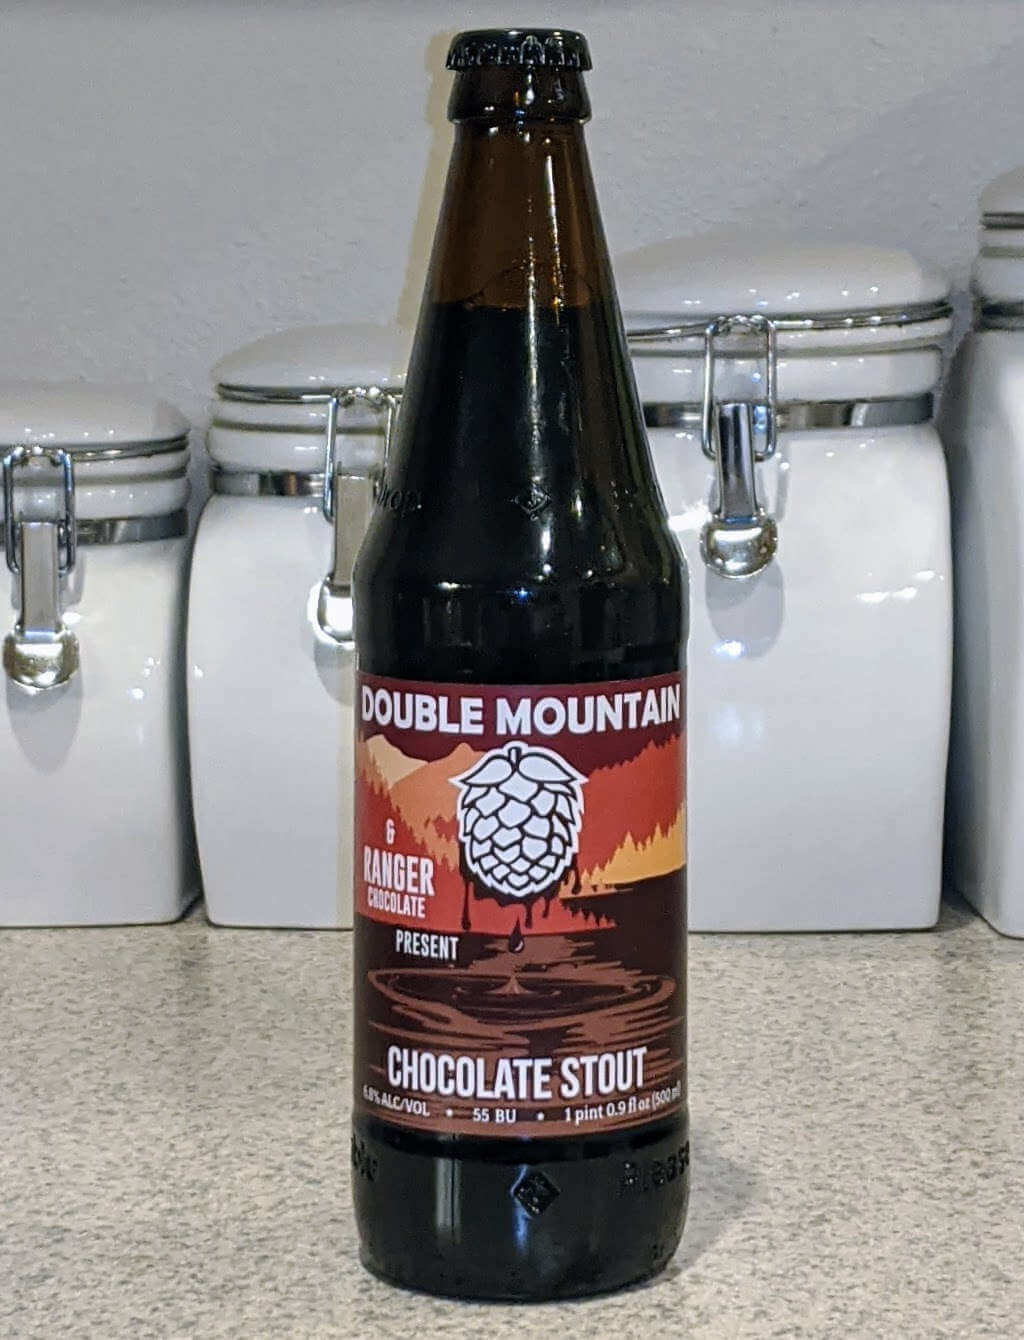 Double Mountain Brewery collaborates with Ranger Chocolate on Chocolate Stout (received)